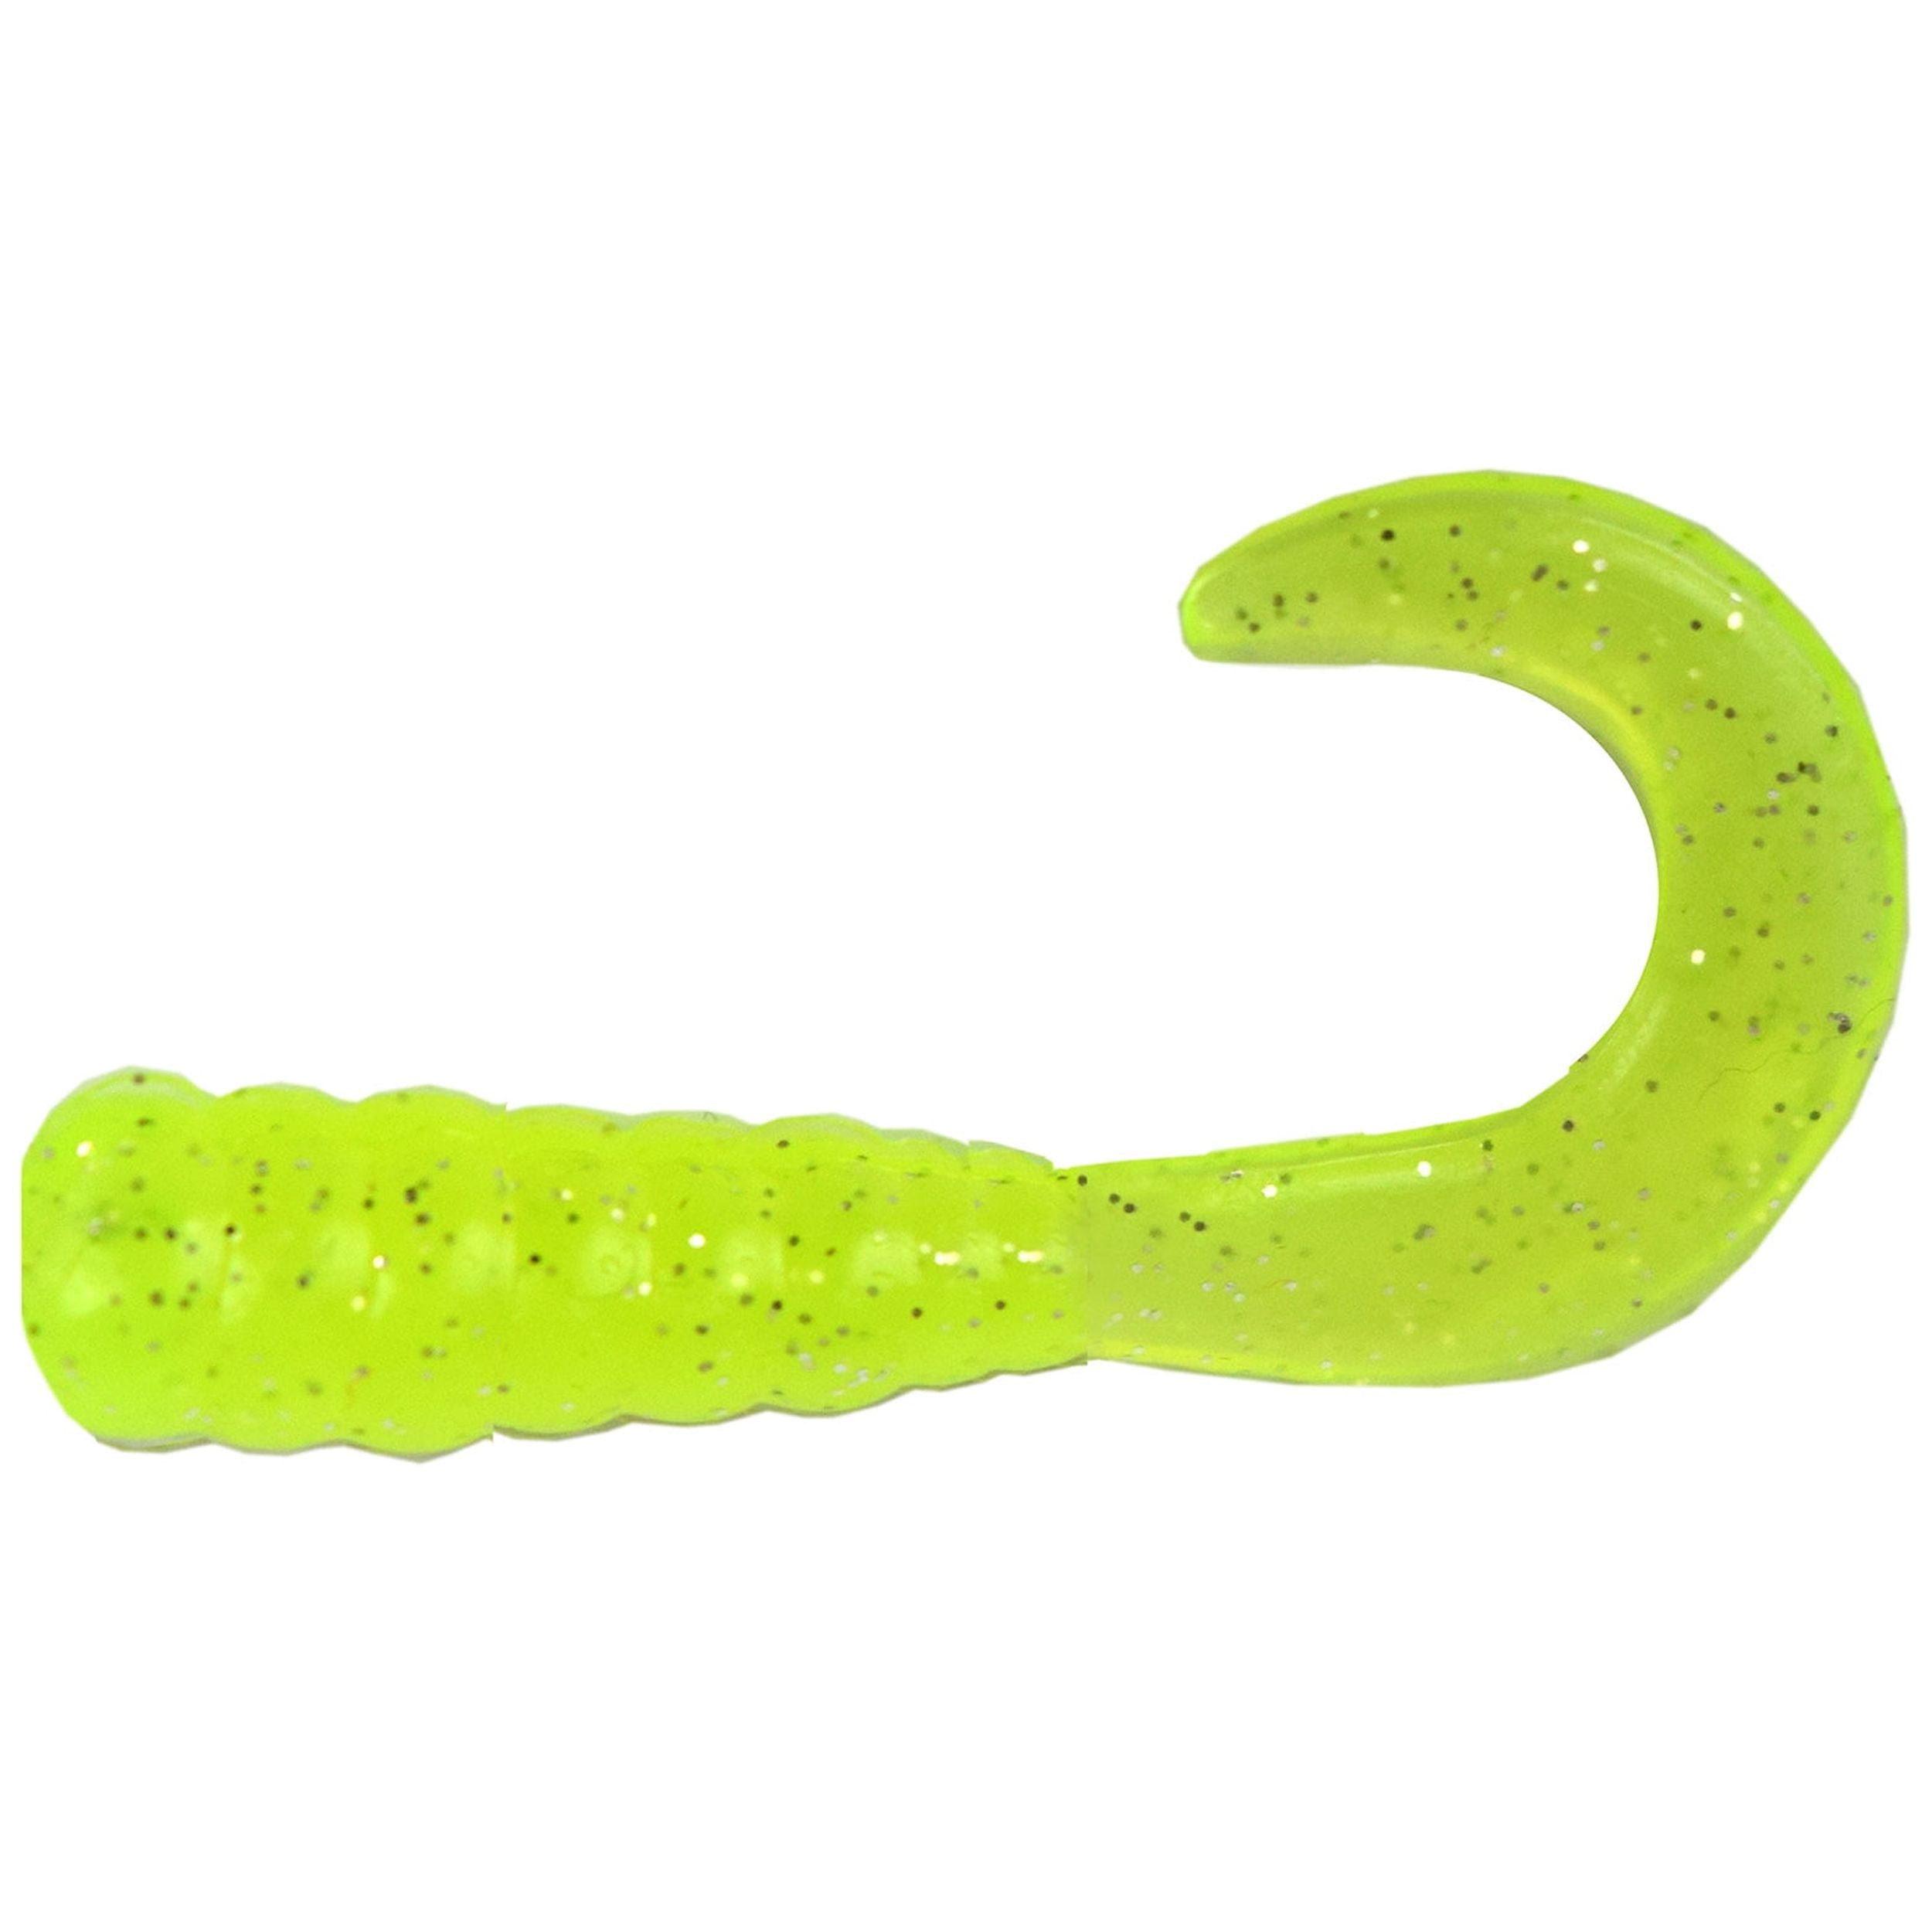 Tackle HD 40-Pack Grub Fishing Lures, 2-Inch Skirted Grub with Curly Tail, Bulk  Fishing Grubs for Crappie, Bass, Walleye, or Trout Bait, Freshwater or  Saltwater Swimbait, Chartreuse Glitter 